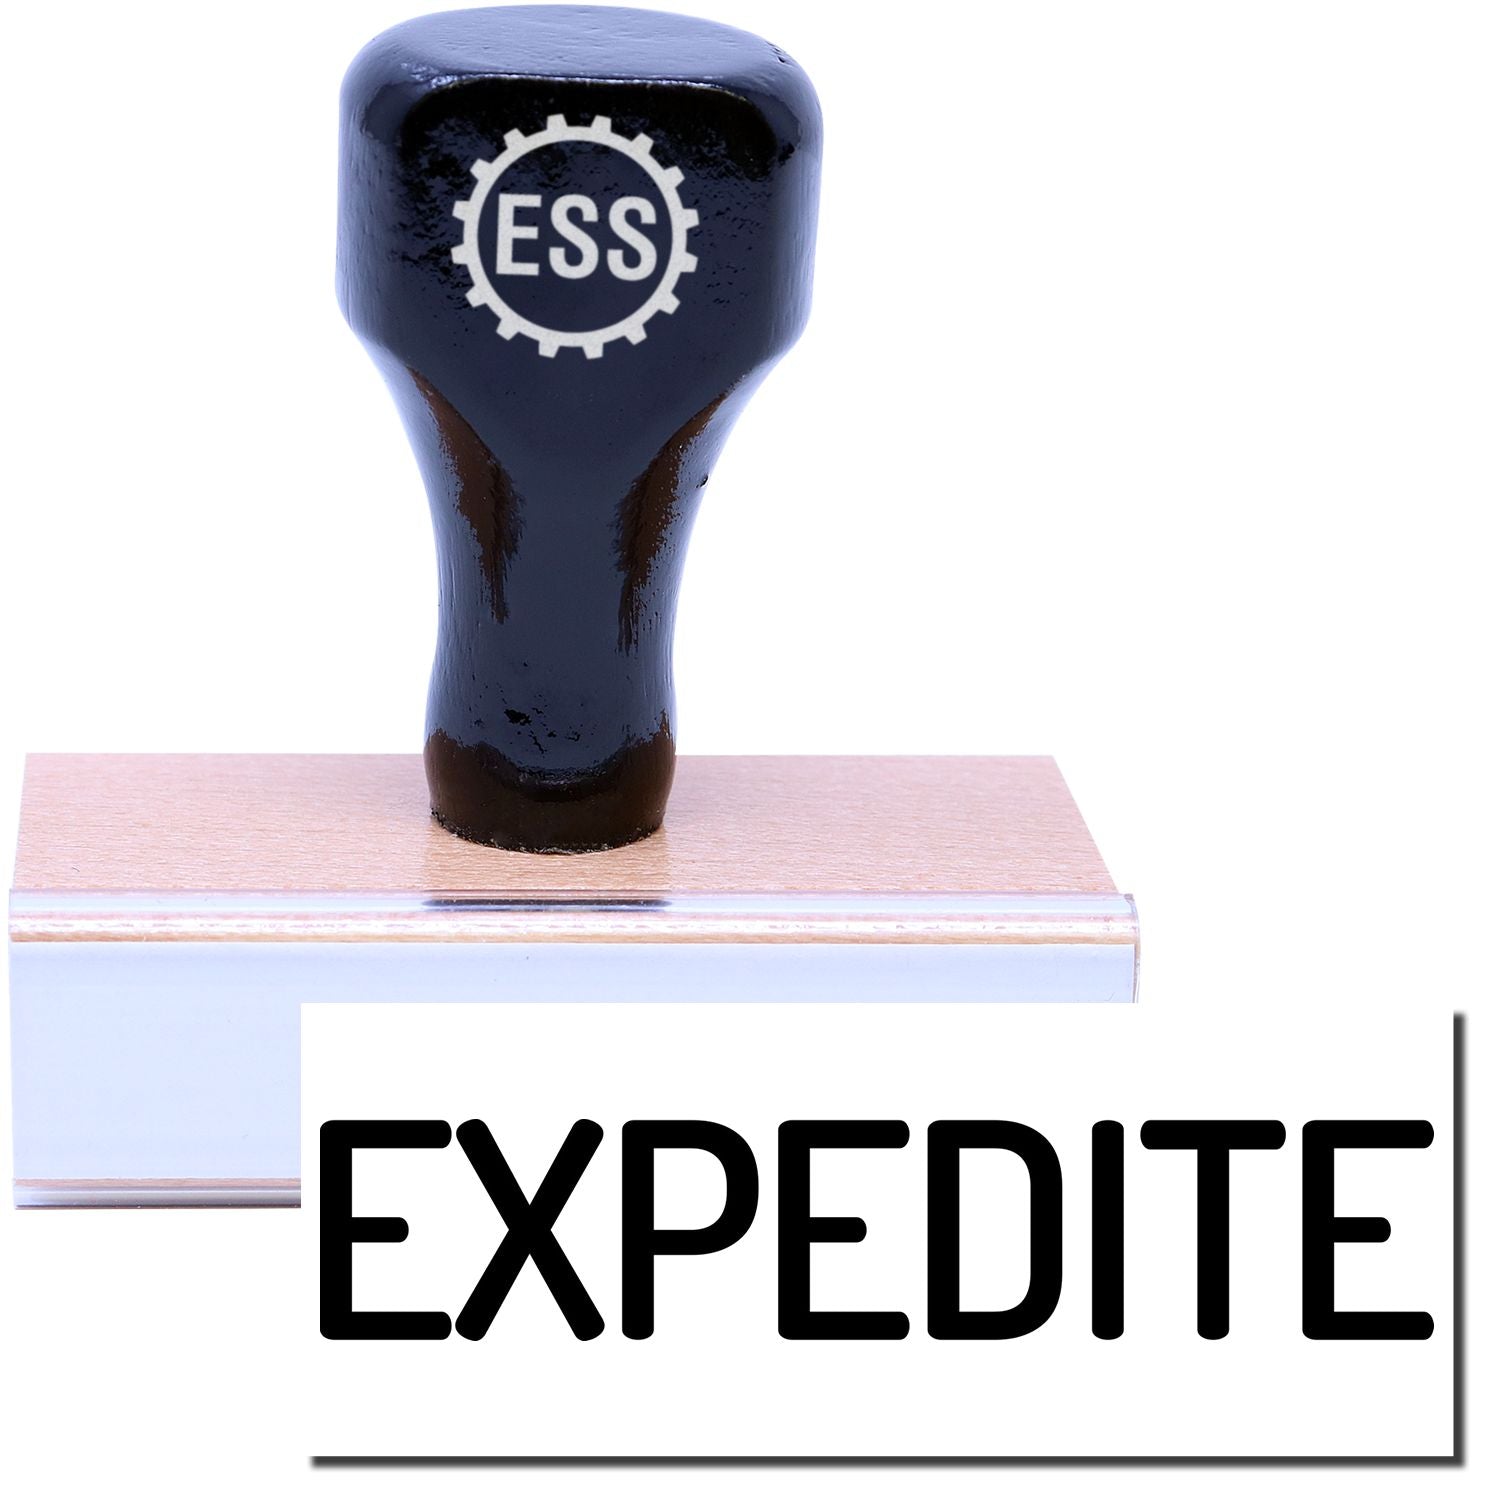 A stock office rubber stamp with a stamped image showing how the text "EXPEDITE" in a narrow font is displayed after stamping.